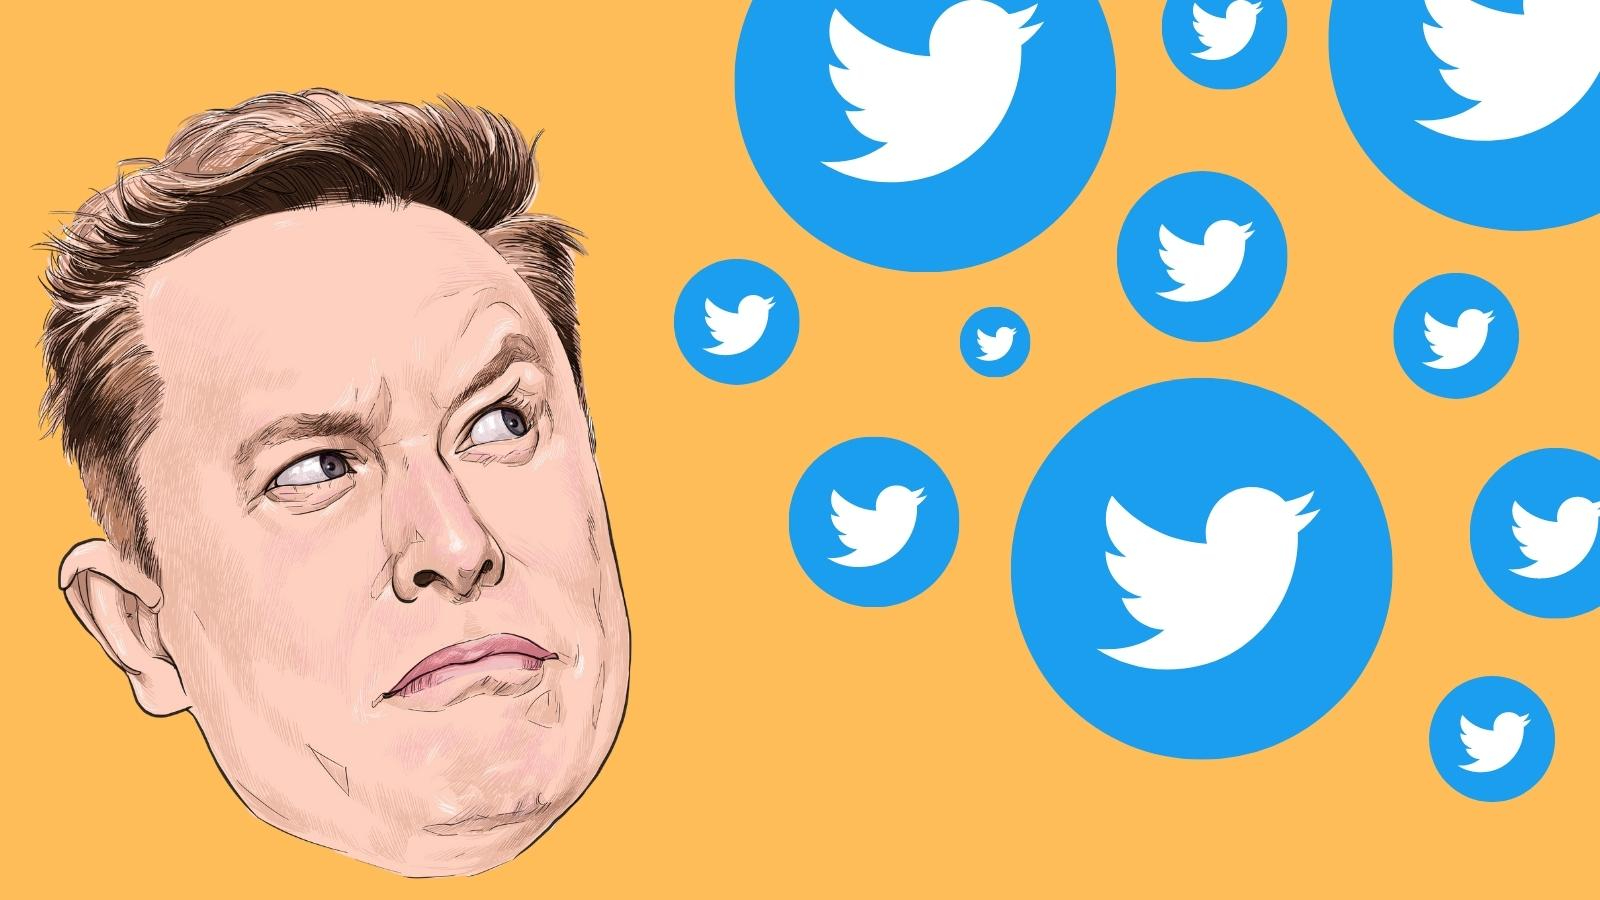 An illustration of Elon Musk drawn by thongyhod, puzzled by the fall of Twitter logos